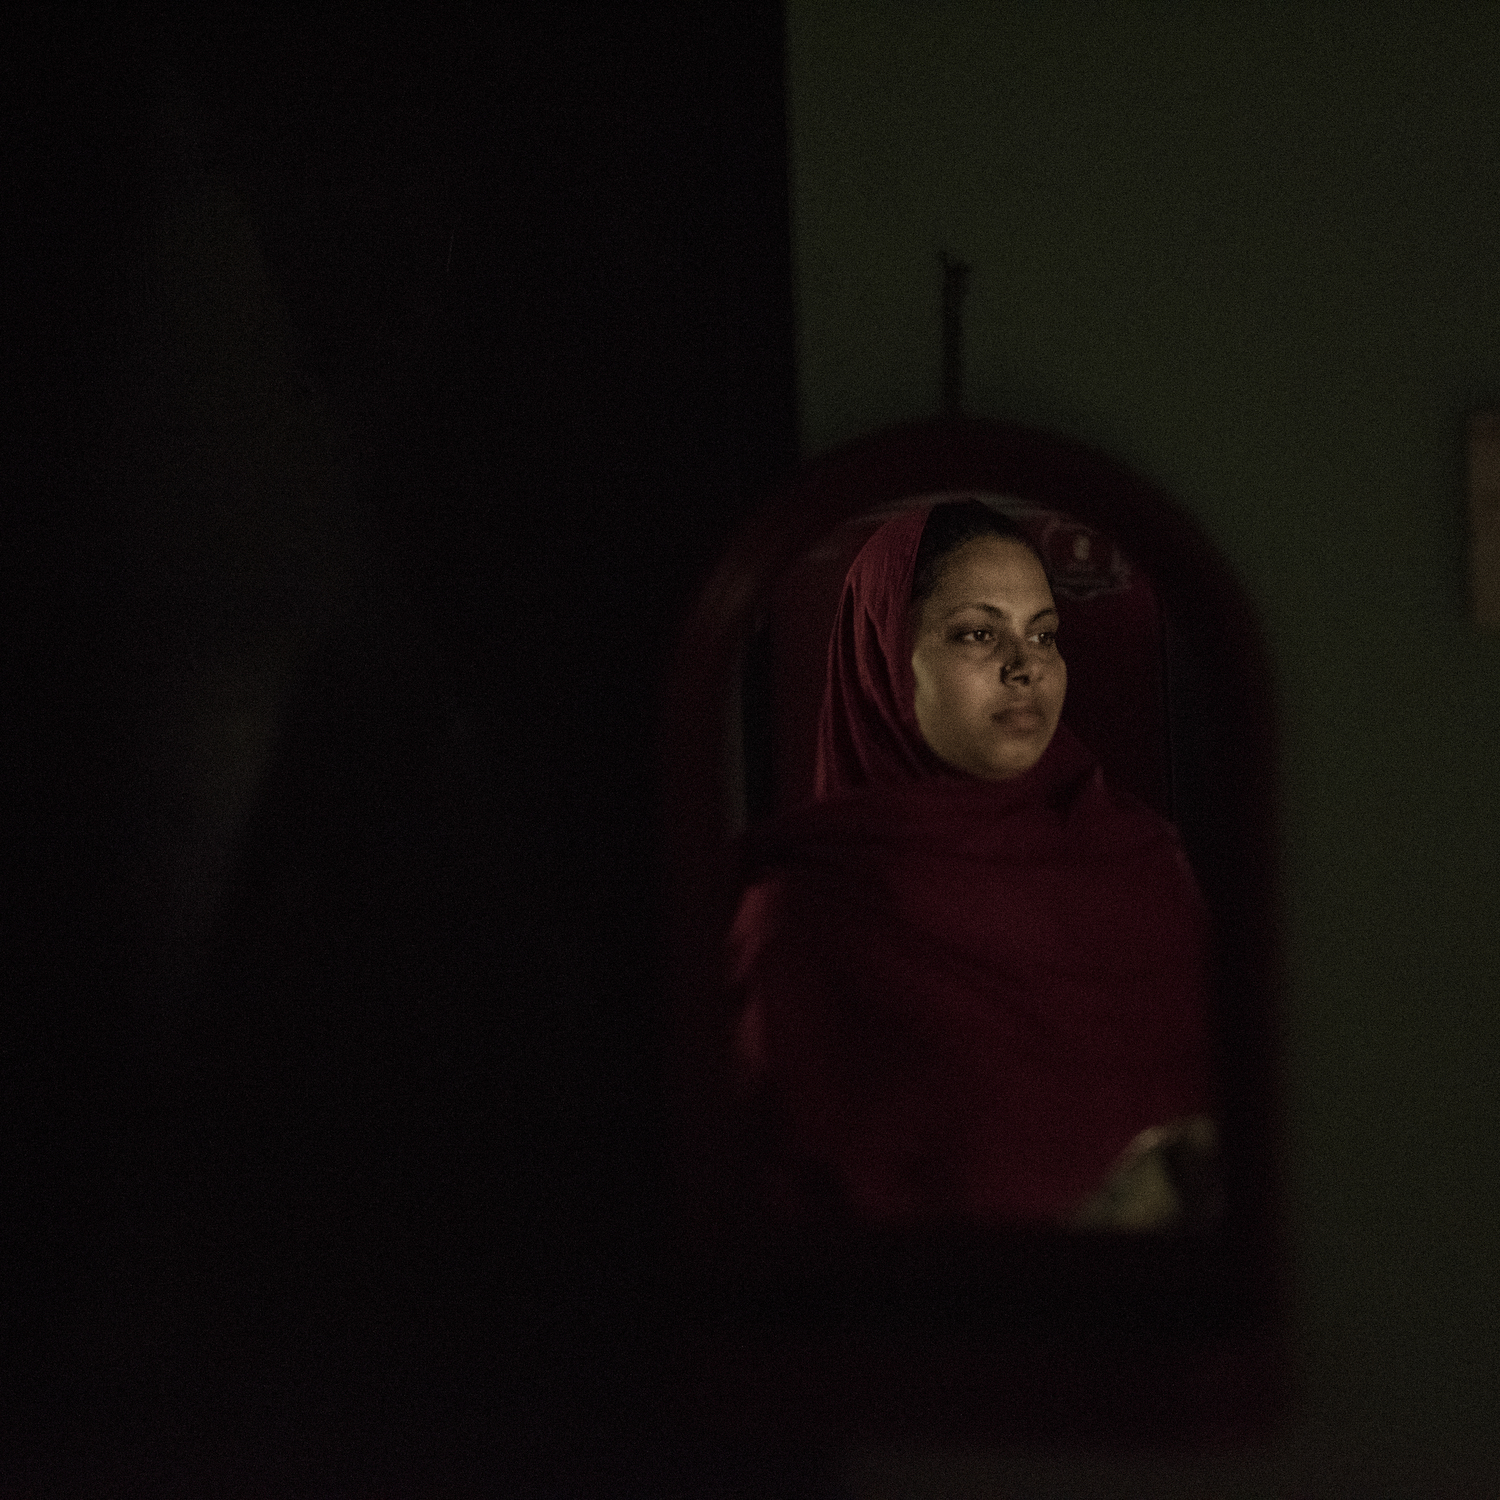 Nazma still sometimes relives the horror through which she had to go in her nightmares